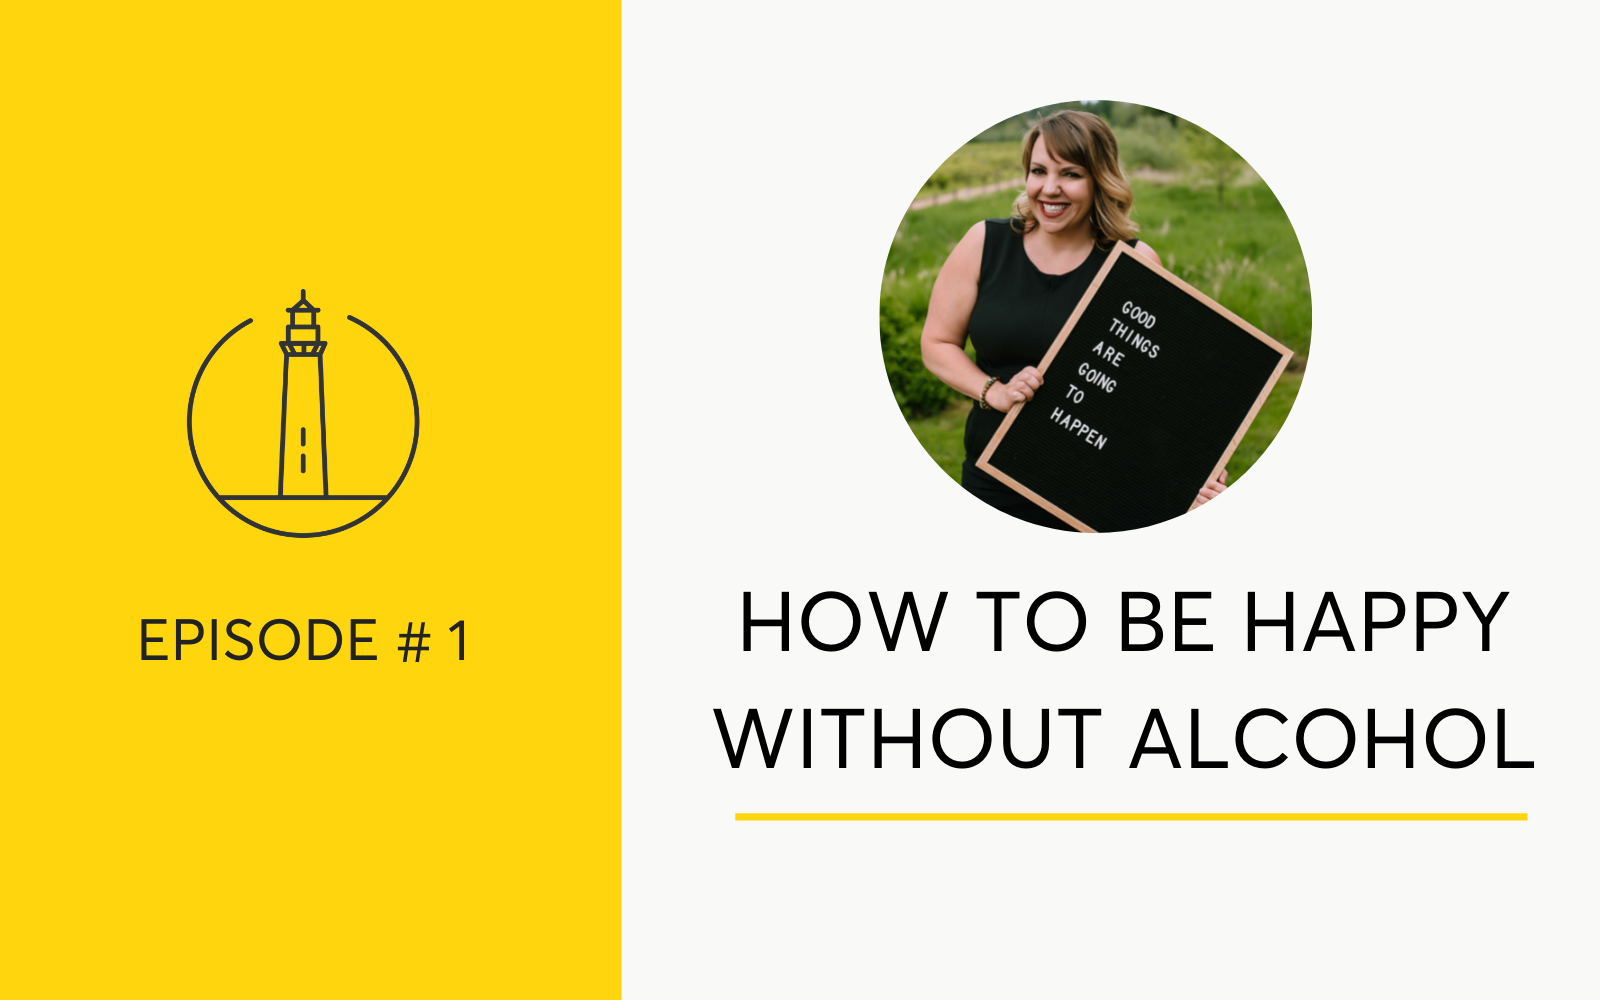 How To Be Happy Without Alcohol